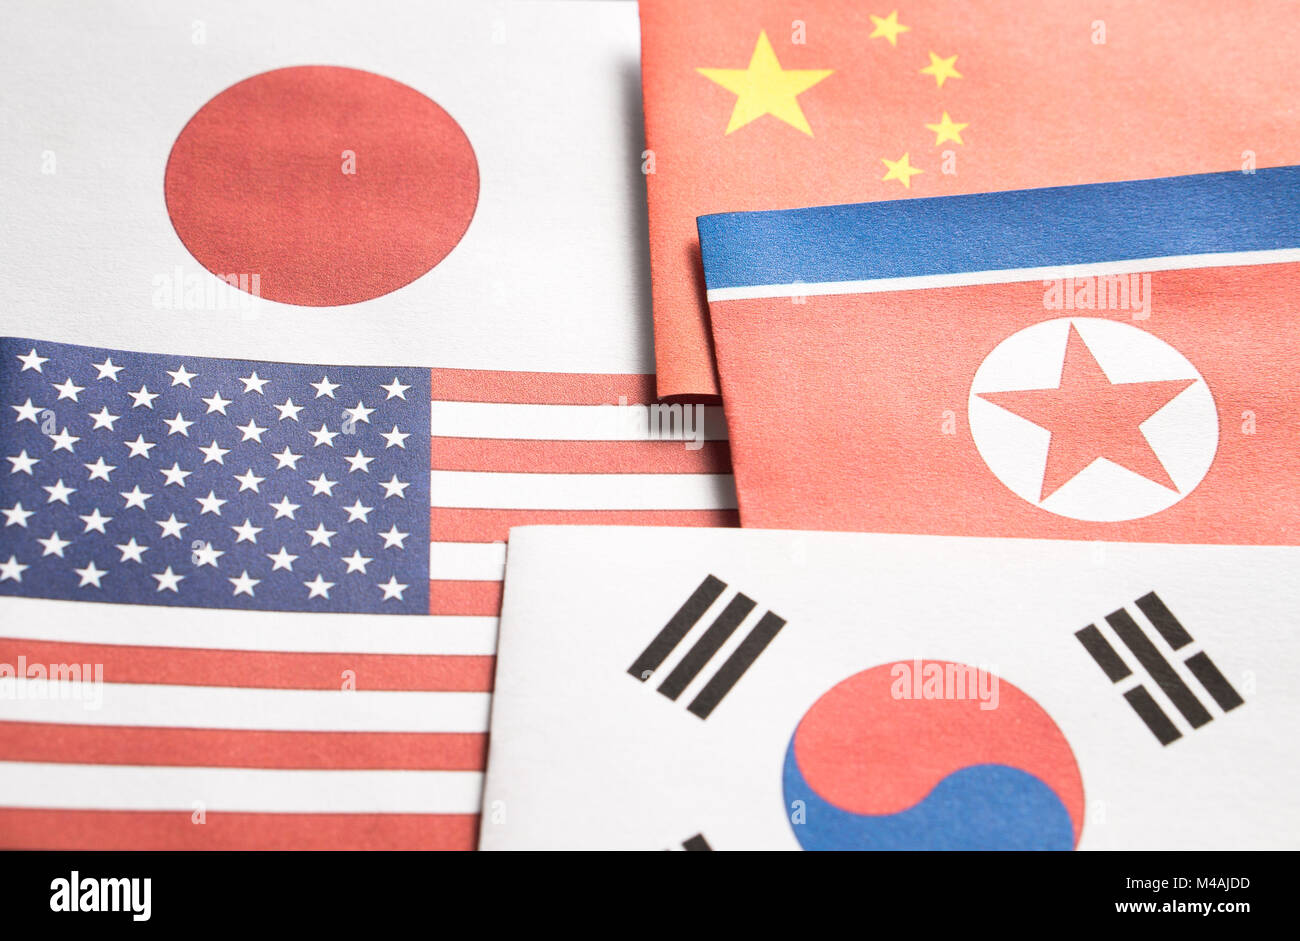 The flag of North Korea, South Korea, United Stated of America (USA), Japan and China made from paper. Stock Photo